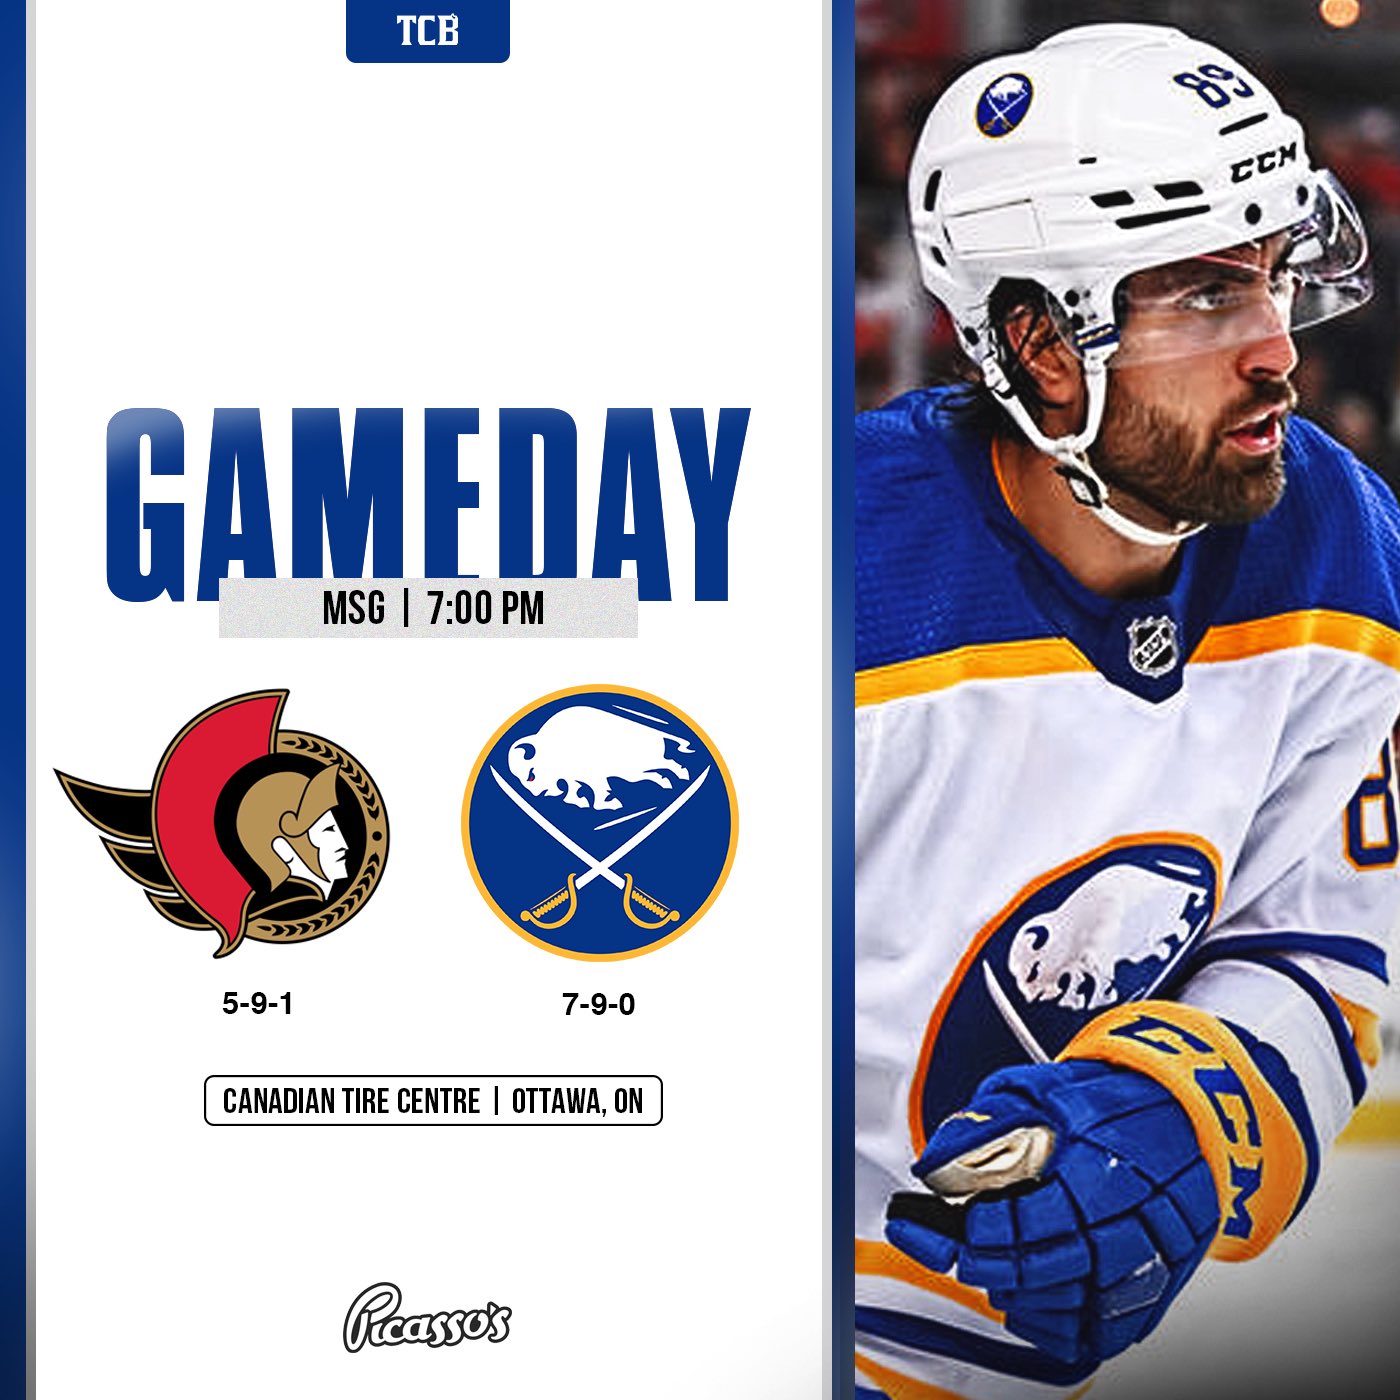 GAMEDAY! The Sabres kick off their back to back tonight against